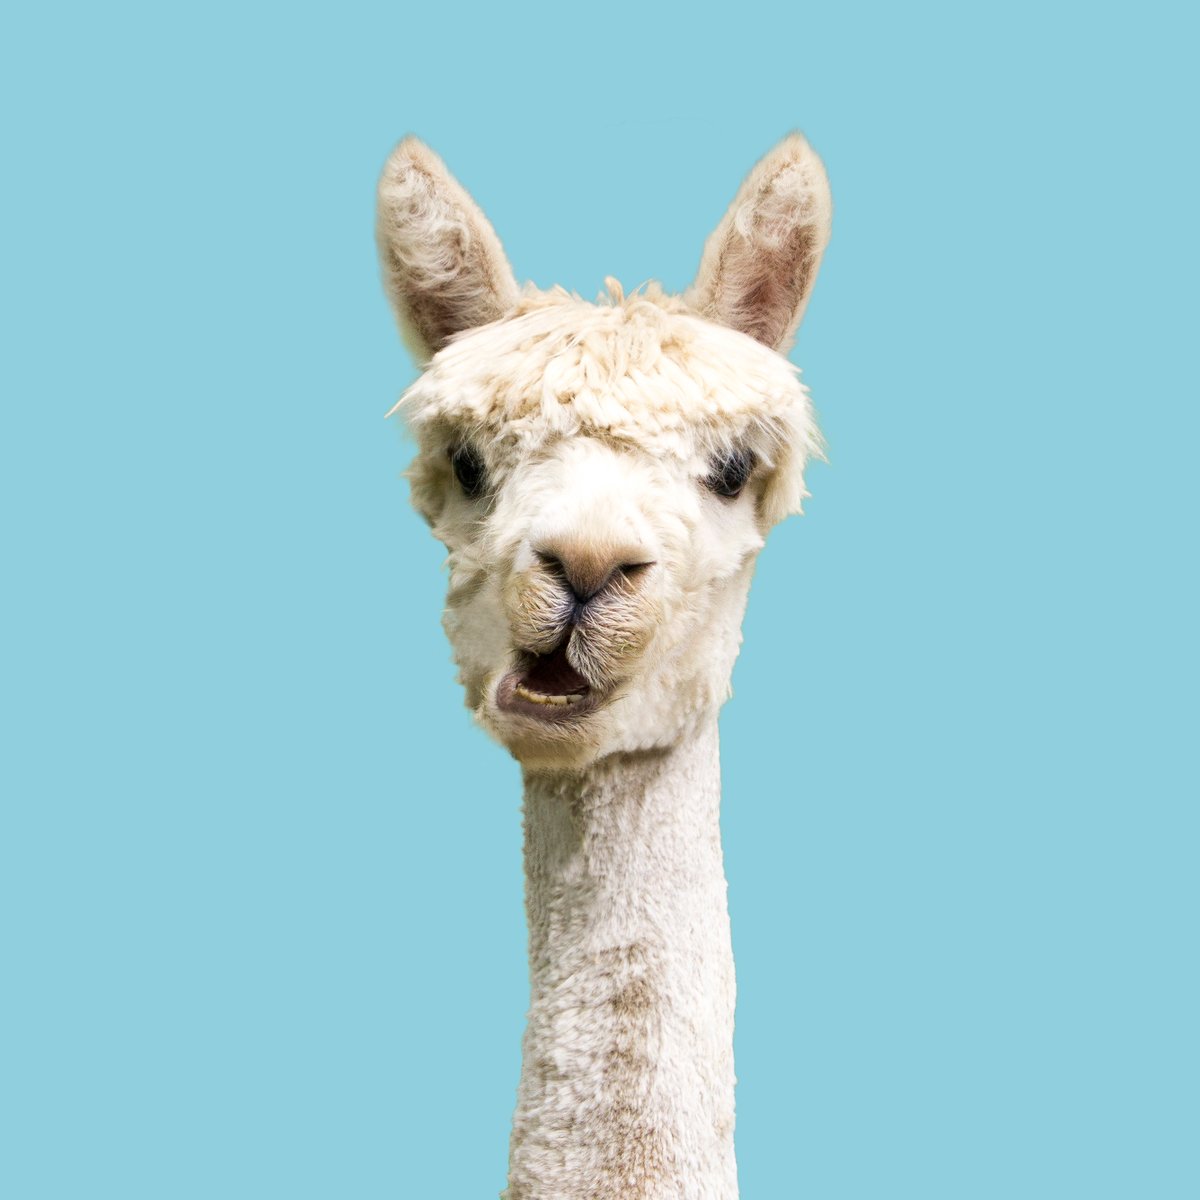 Just popping by to say that alpacas will be visiting the Ralph Ellison Library on May 21! This is your chance to hear more about alpacas - plus have the chance to pet them! Details: ow.ly/fECI50RyYQl